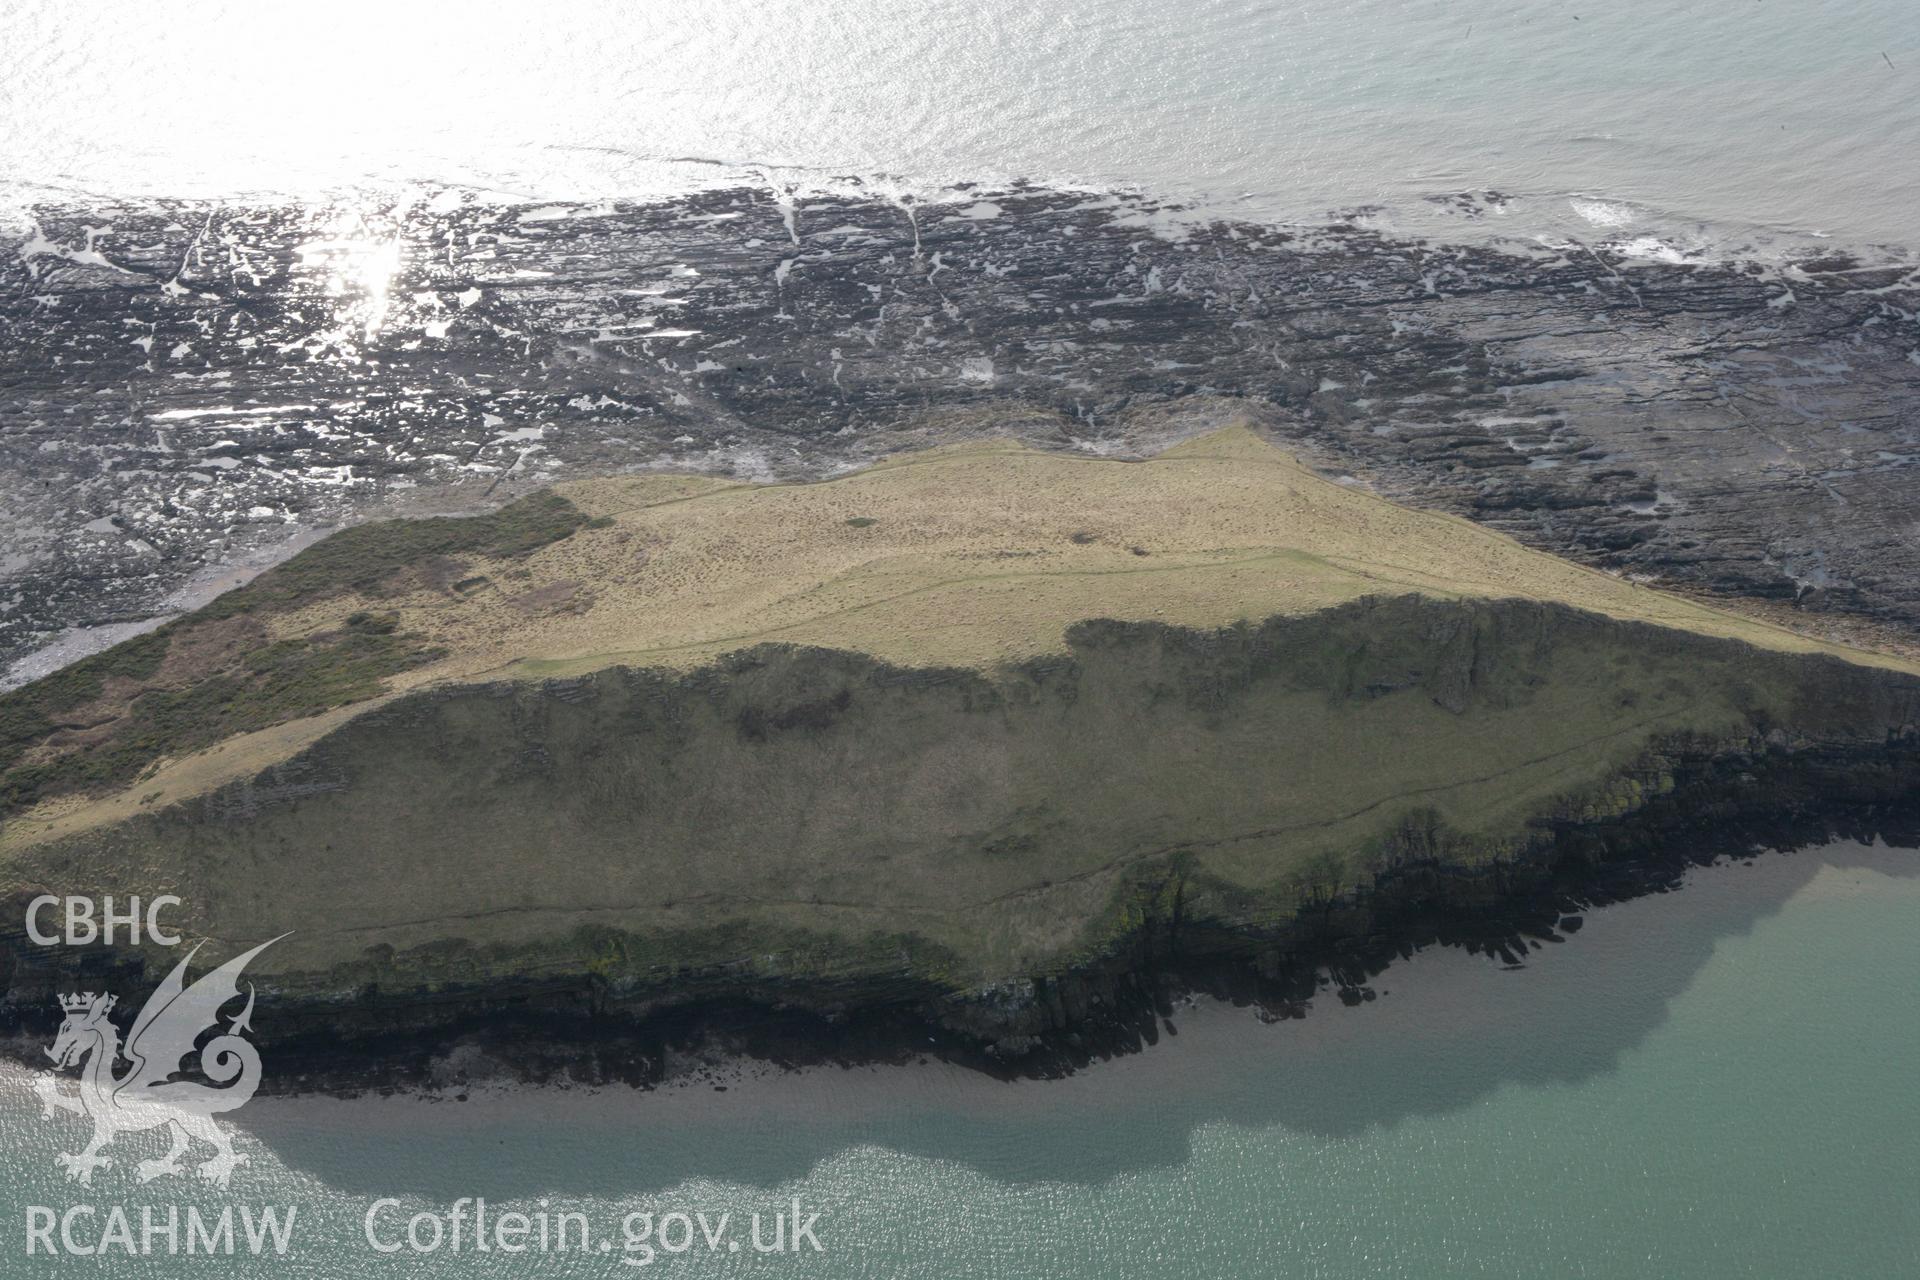 RCAHMW colour oblique photograph of Worm's Head, enclosure. Taken by Toby Driver on 02/03/2010.